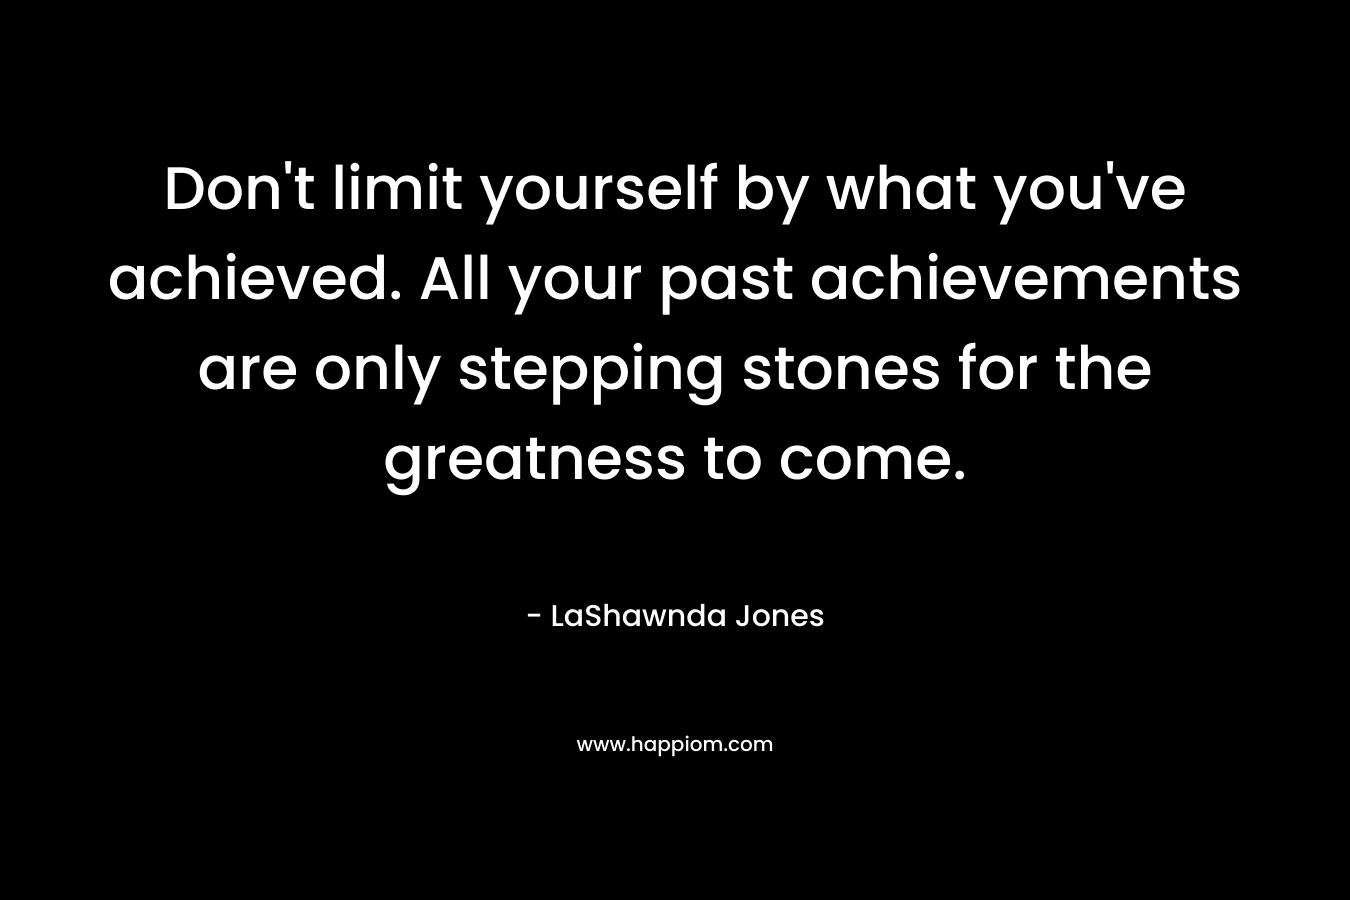 Don’t limit yourself by what you’ve achieved. All your past achievements are only stepping stones for the greatness to come. – LaShawnda Jones